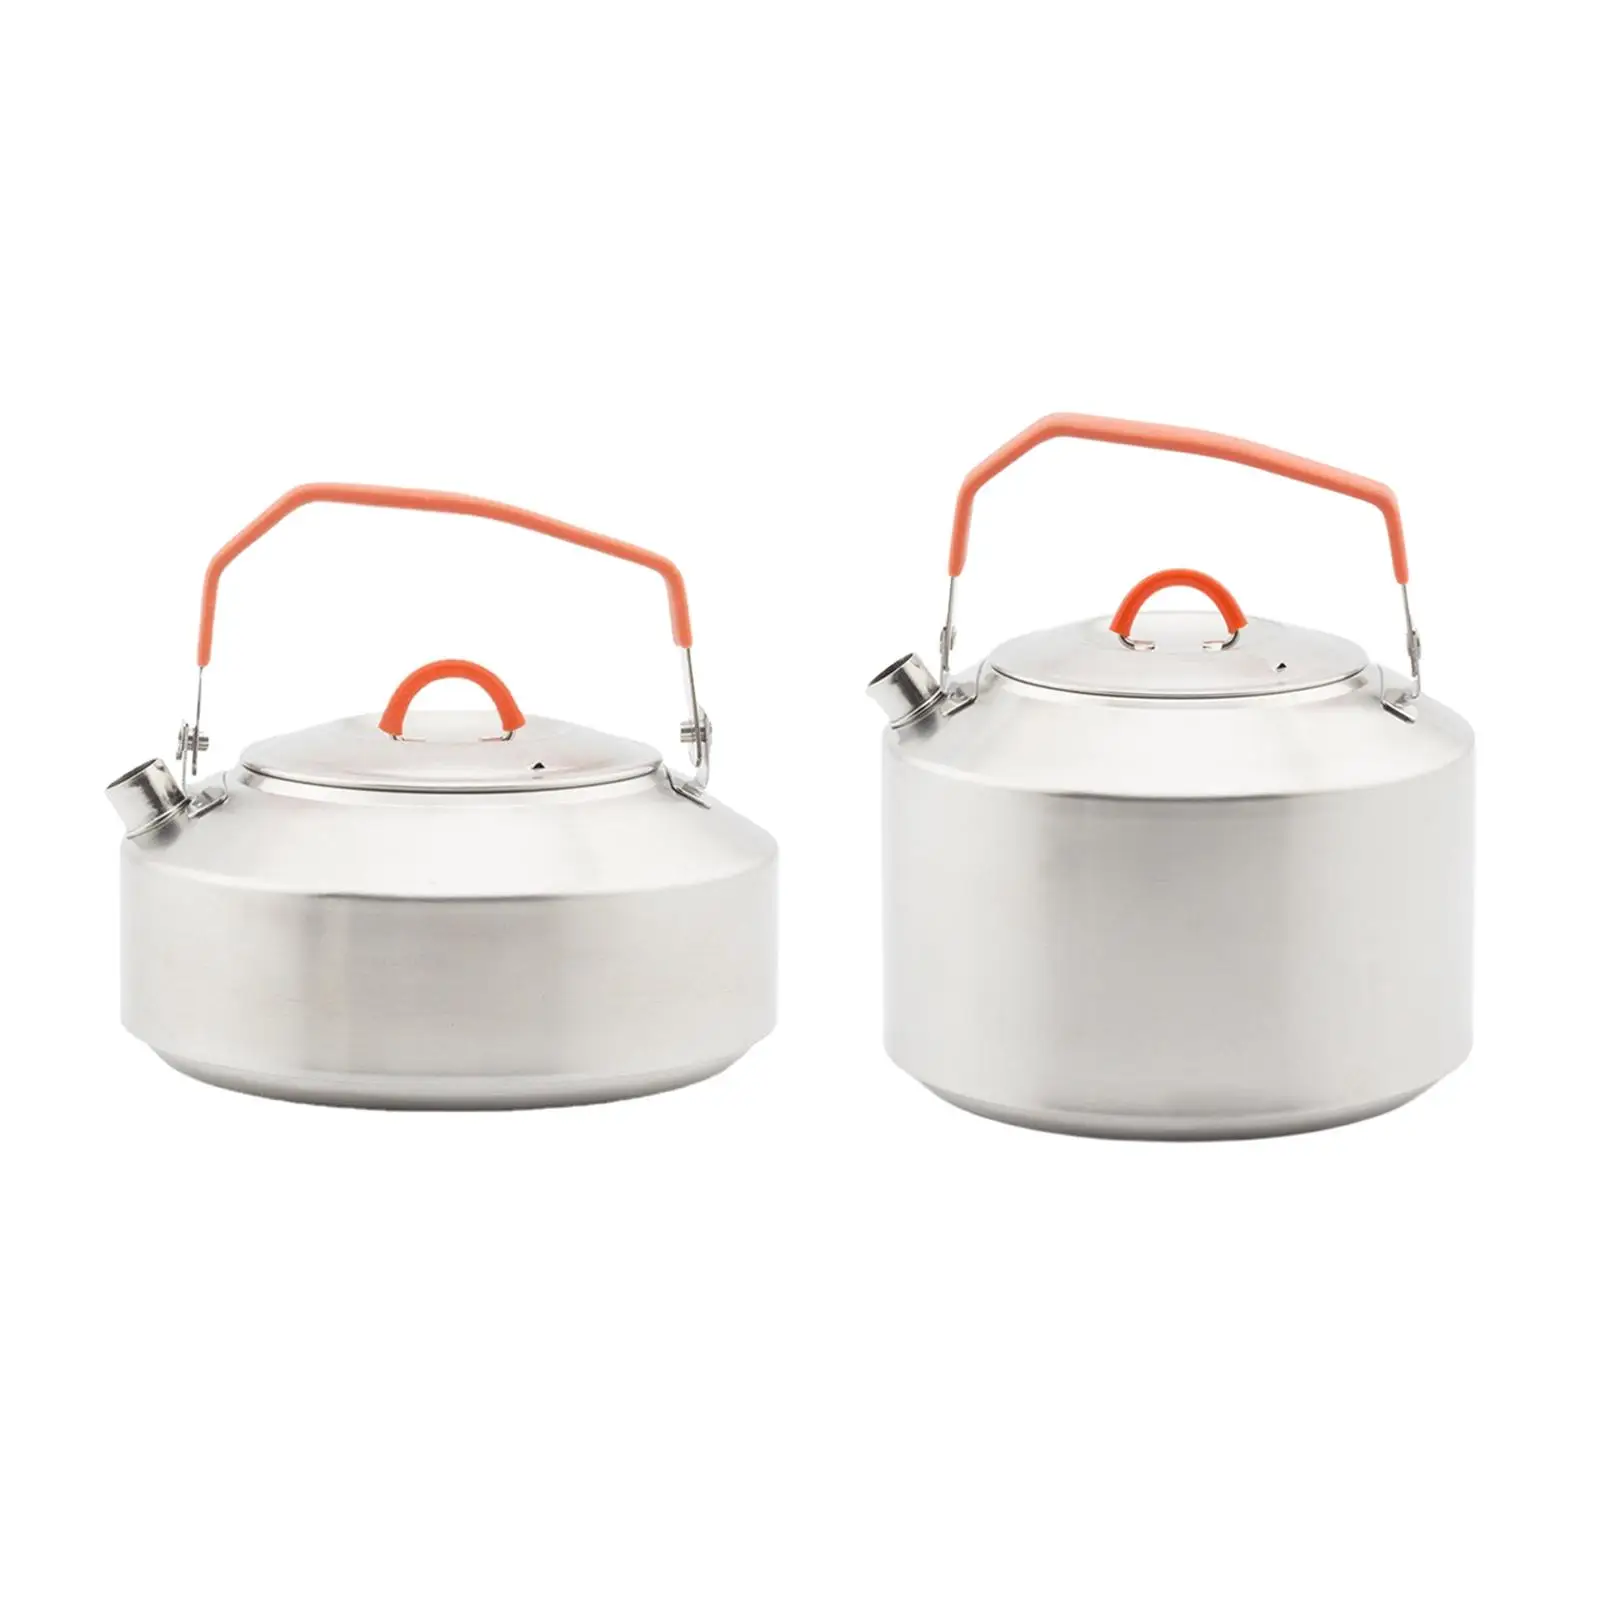 Camping Tea Kettle with Handles Camping Tea Pot for Fishing Backpacking